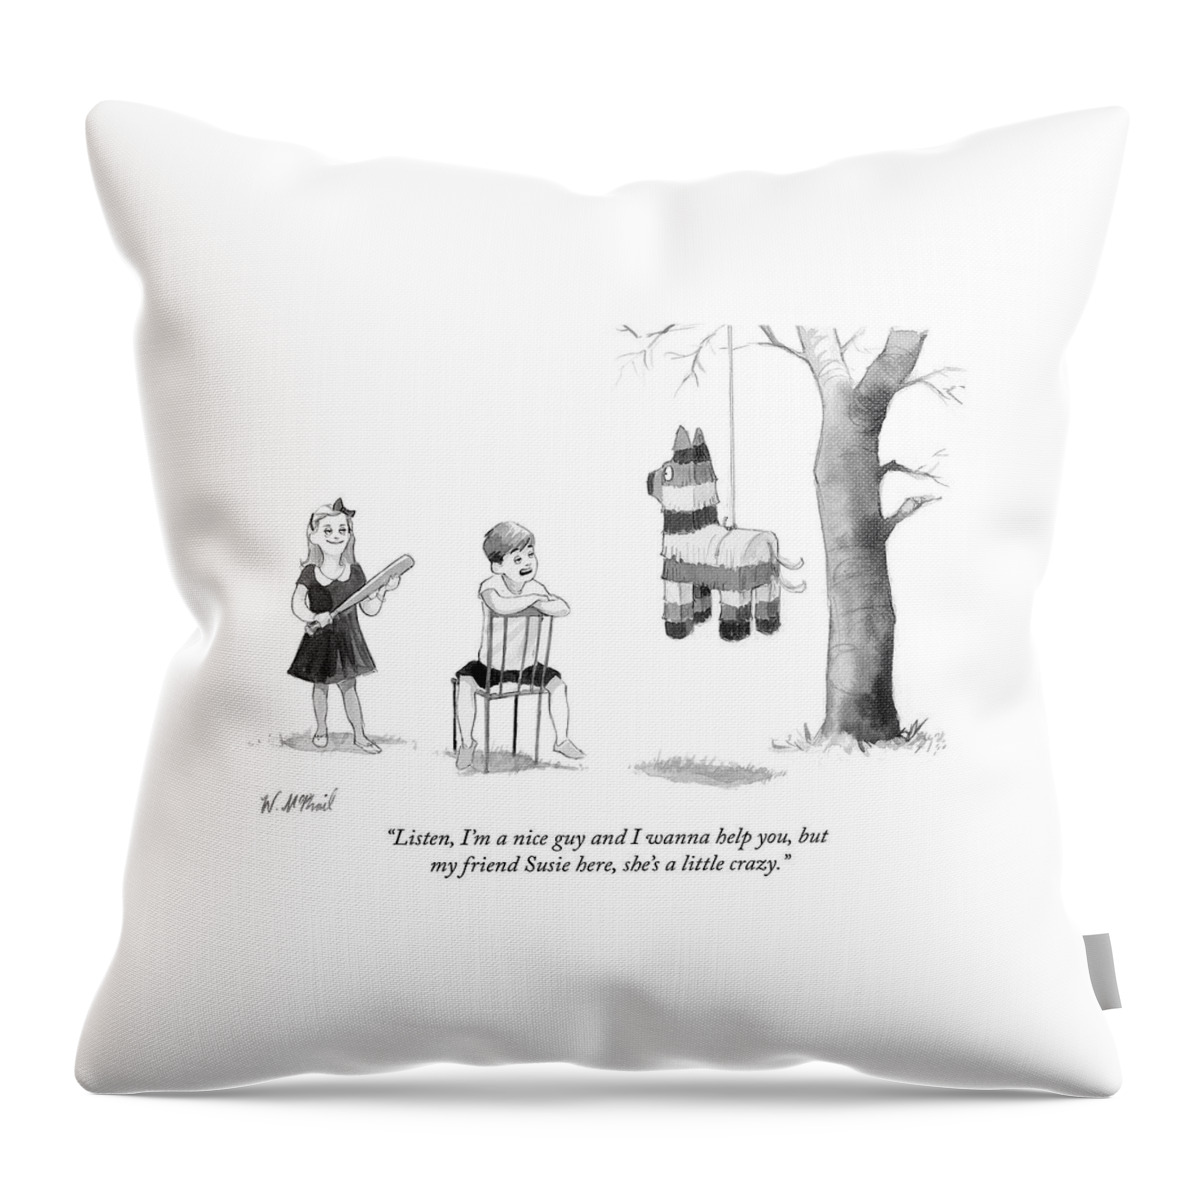 My Friend Susie Here Shes A Little Crazy Throw Pillow